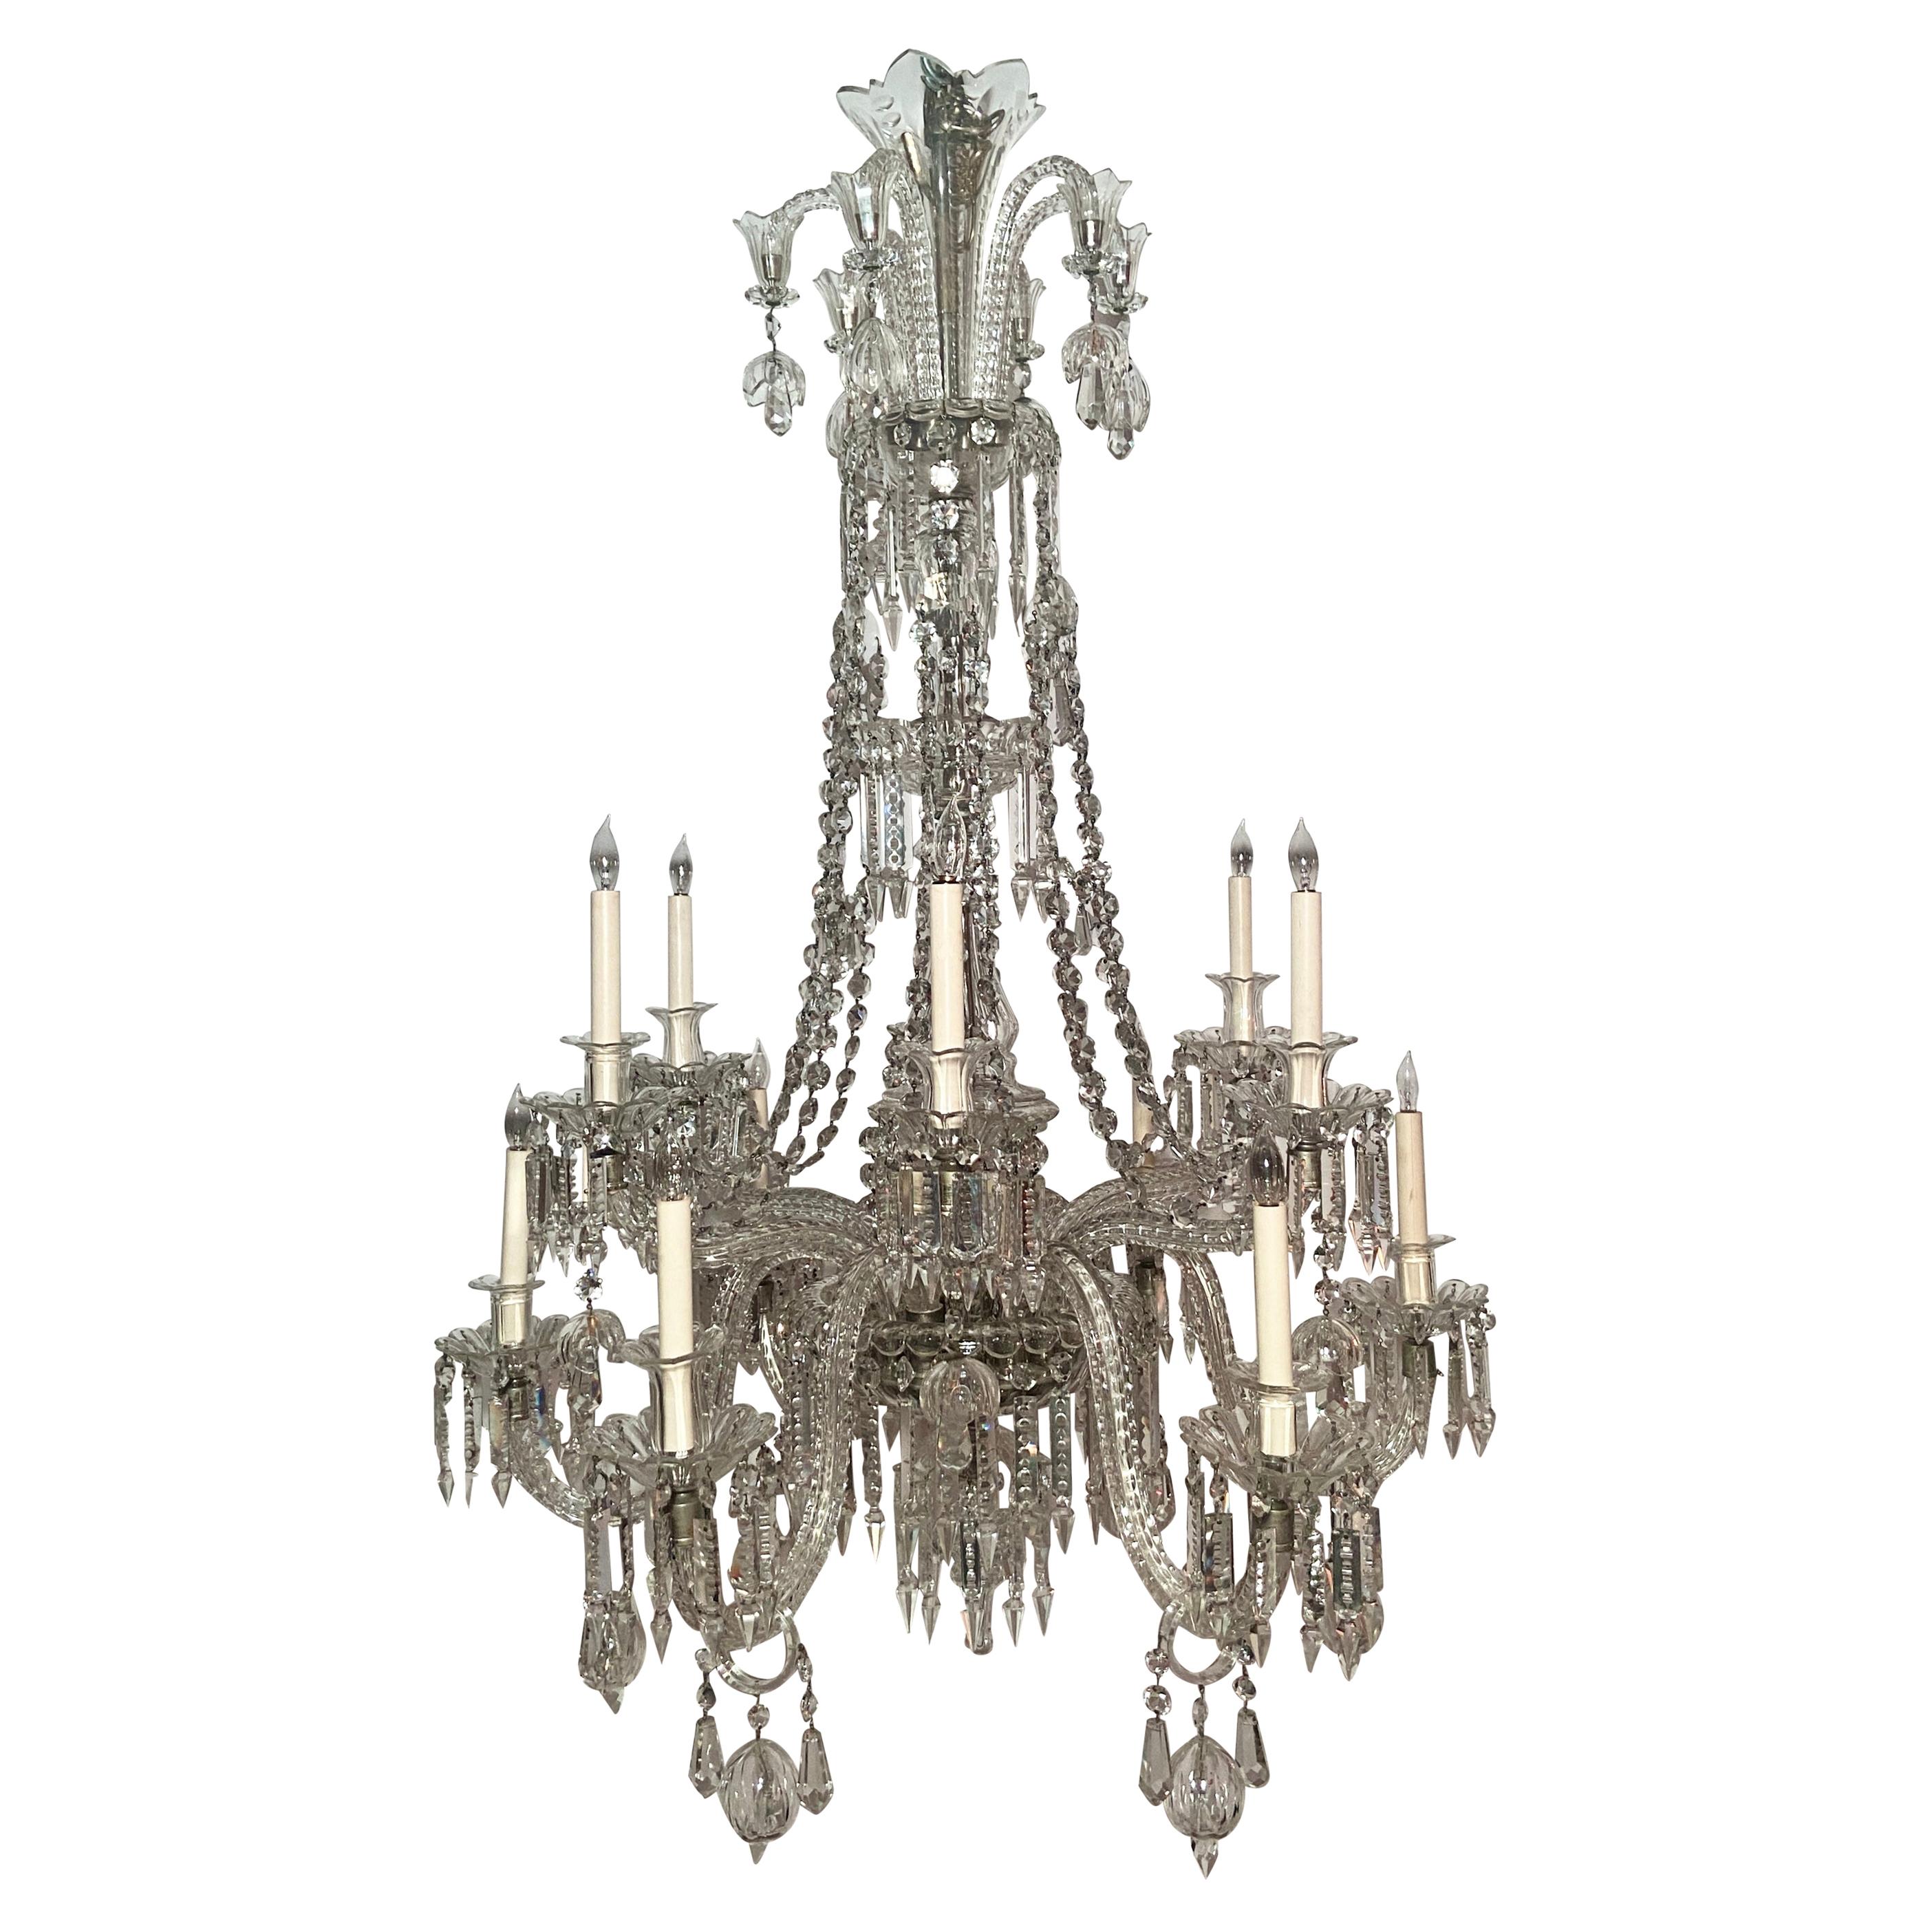 Magnificent Antique 19th Century All Lead Cut Crystal Chandelier.